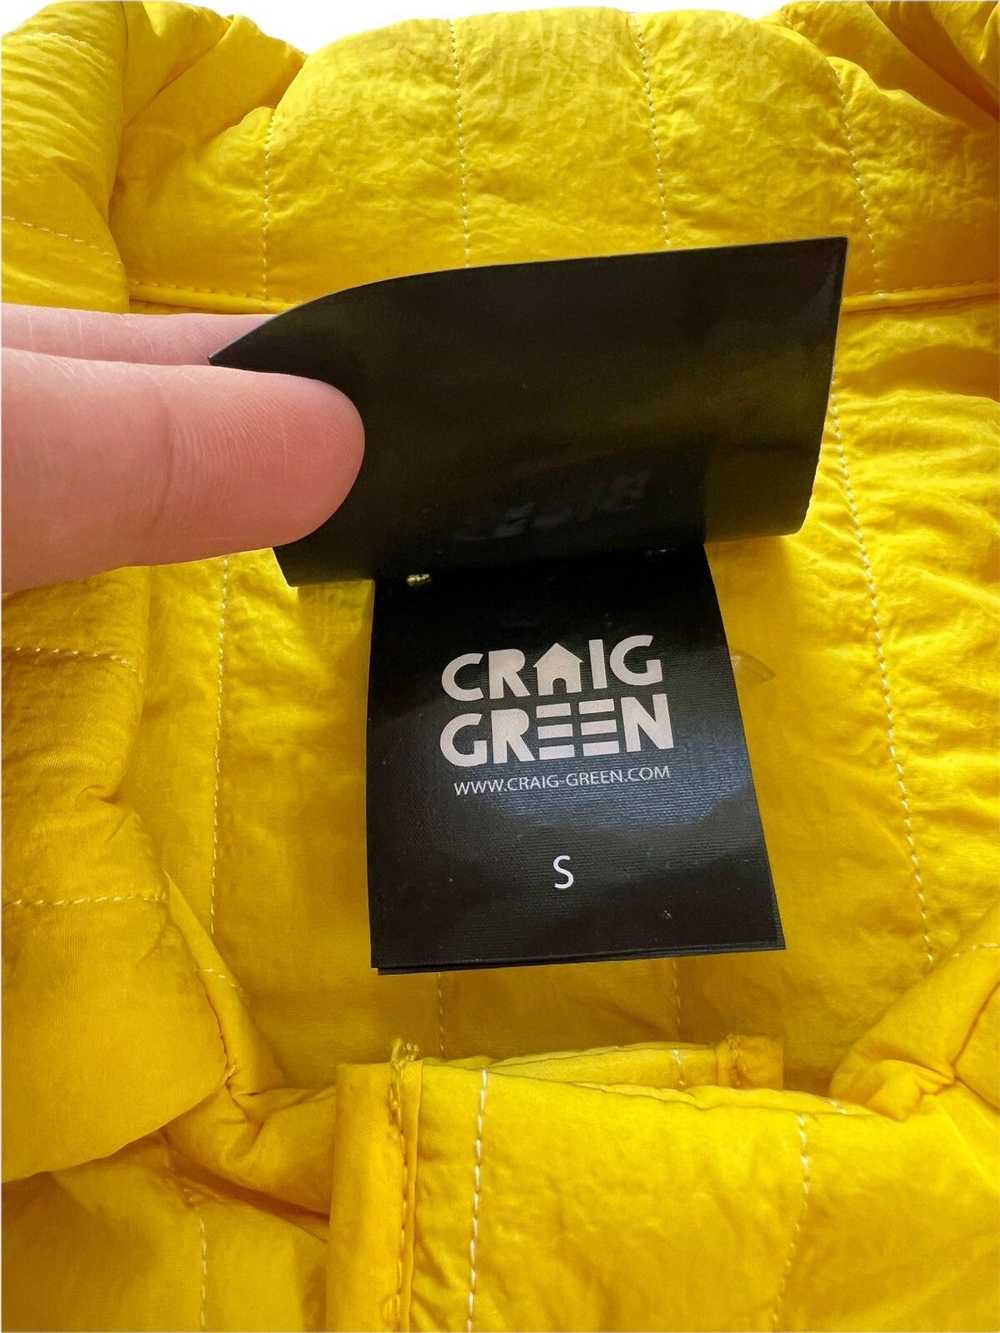 Craig Green SS2016 Yellow Quilted Work Jacket - image 4